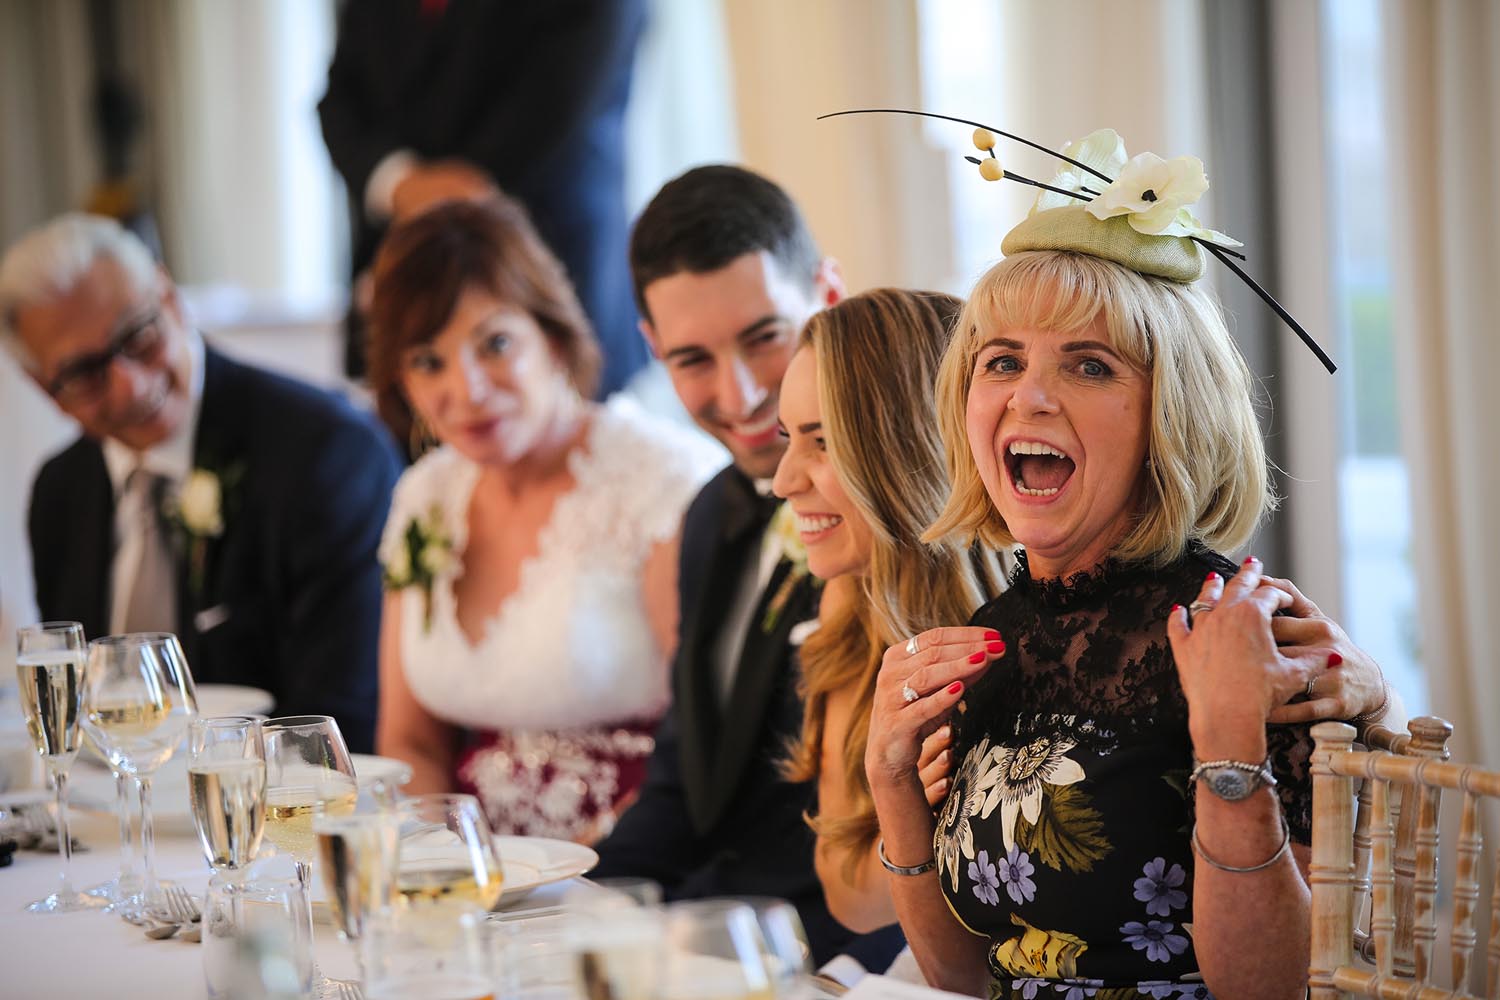 Wedding guest laughing during speeches